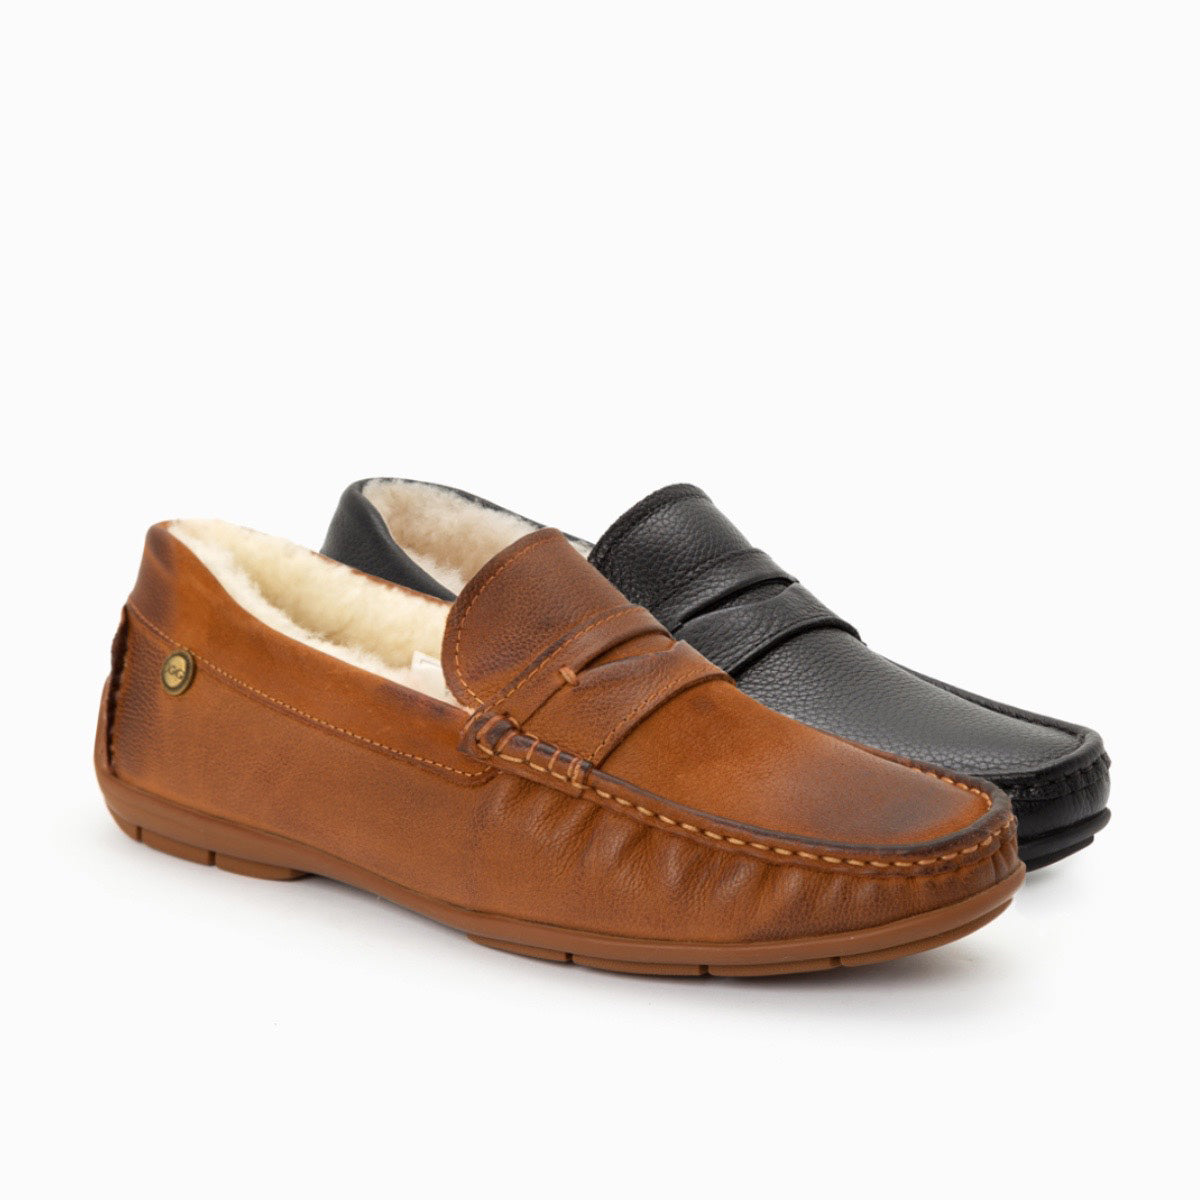 Ugg Men's Conor Loafer (Water Resistant)